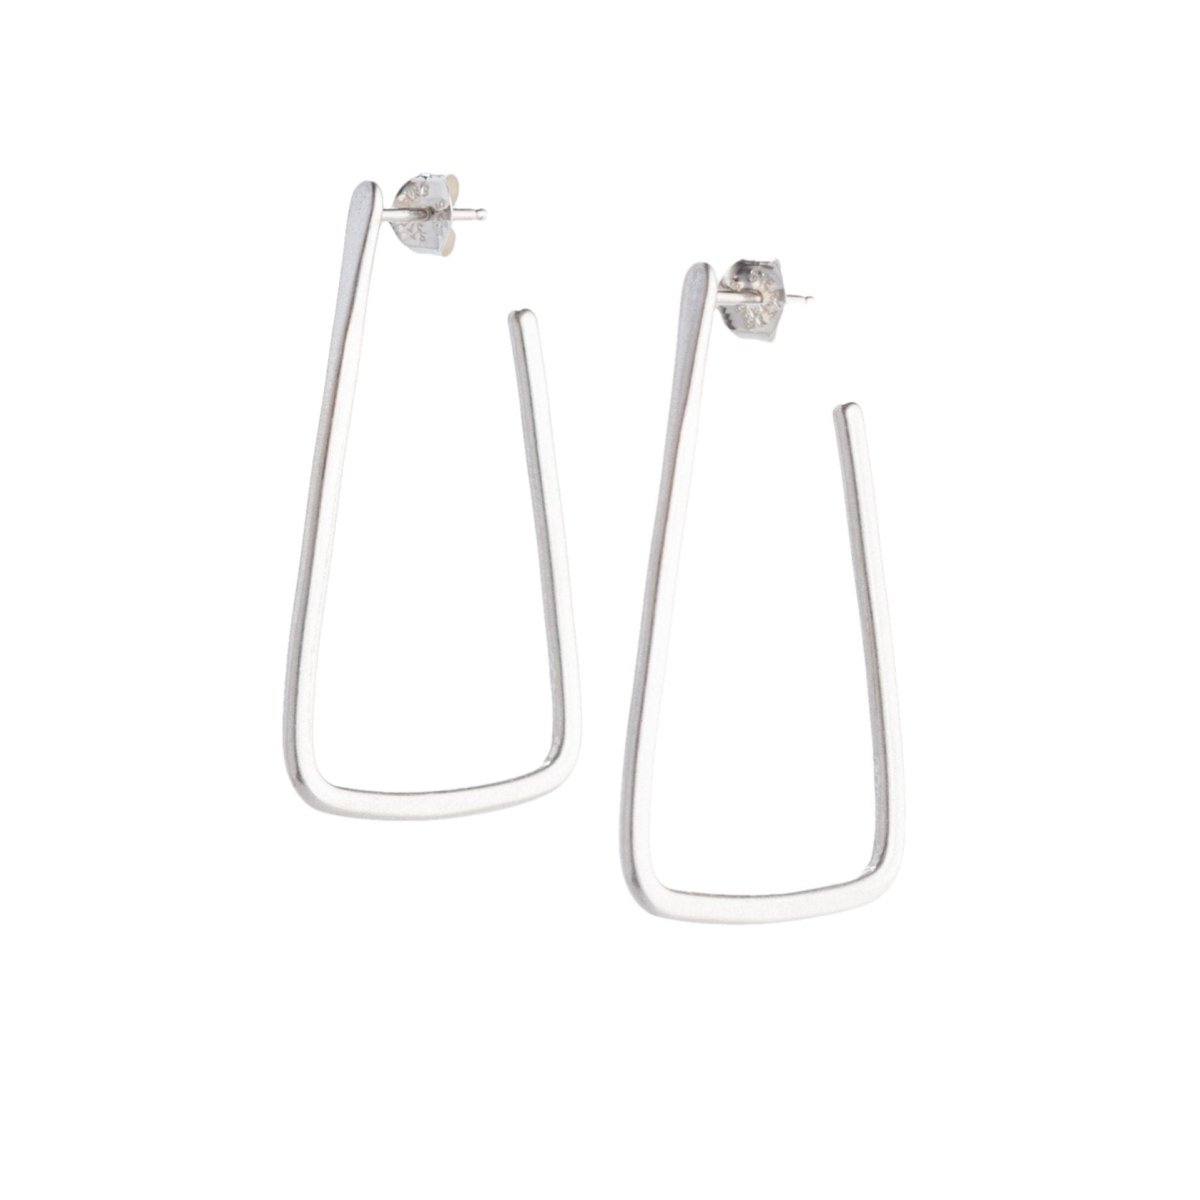 Simple, geometric, silver hoop earrings with curved edges and a matte finish, sterling silver earrings posts, and sterling silver butterfly earring backings. Hand-crafted in Portland, Oregon. 